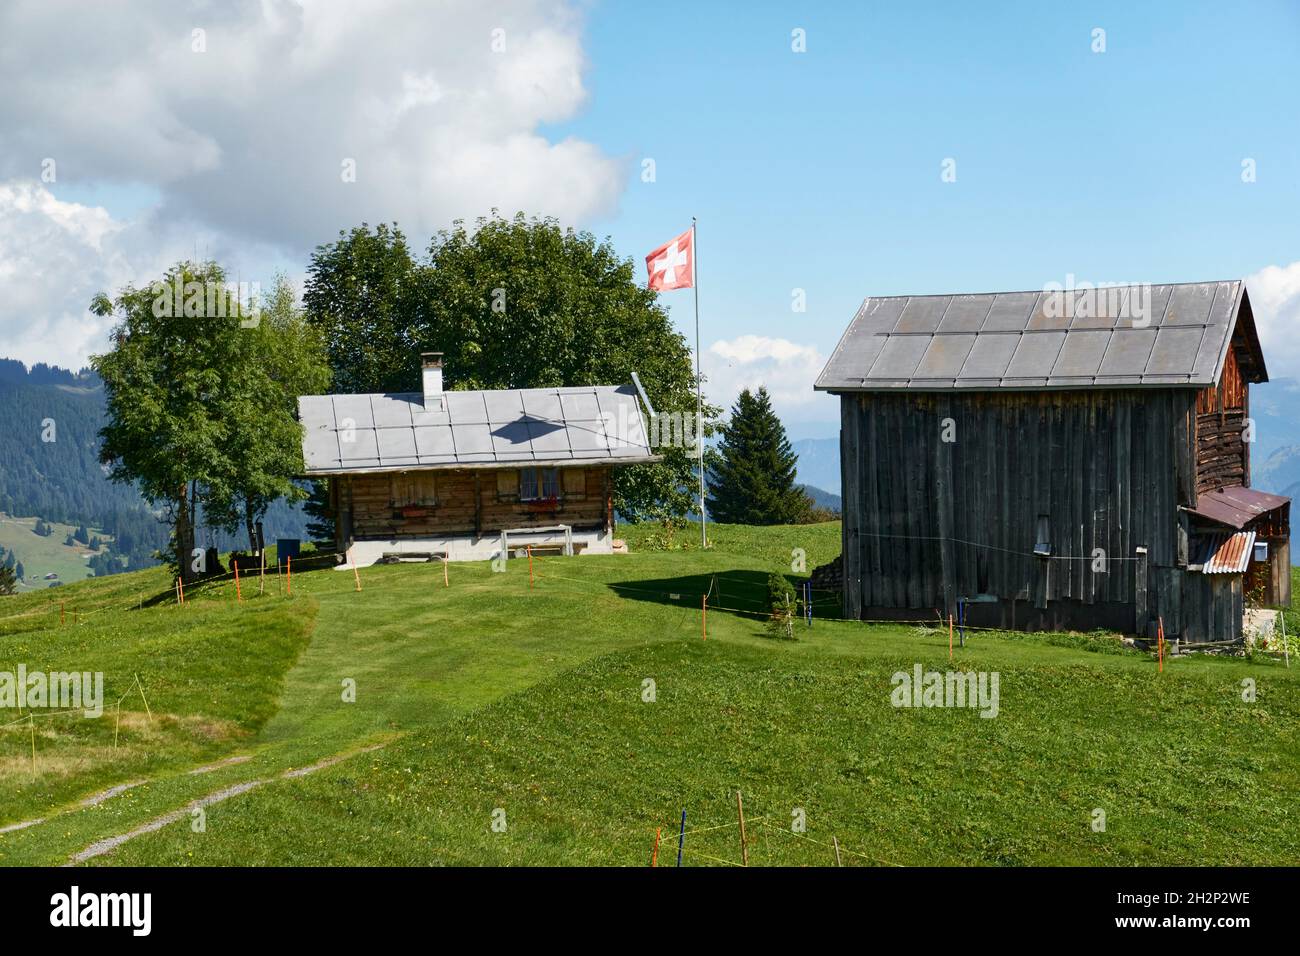 Chalet With A Waving Swiss Flag And An Old Hay Barn On A Green Lawn. In The Background Clouds And Blue Sky. Surselva Grisons Switzerland Stock Photo